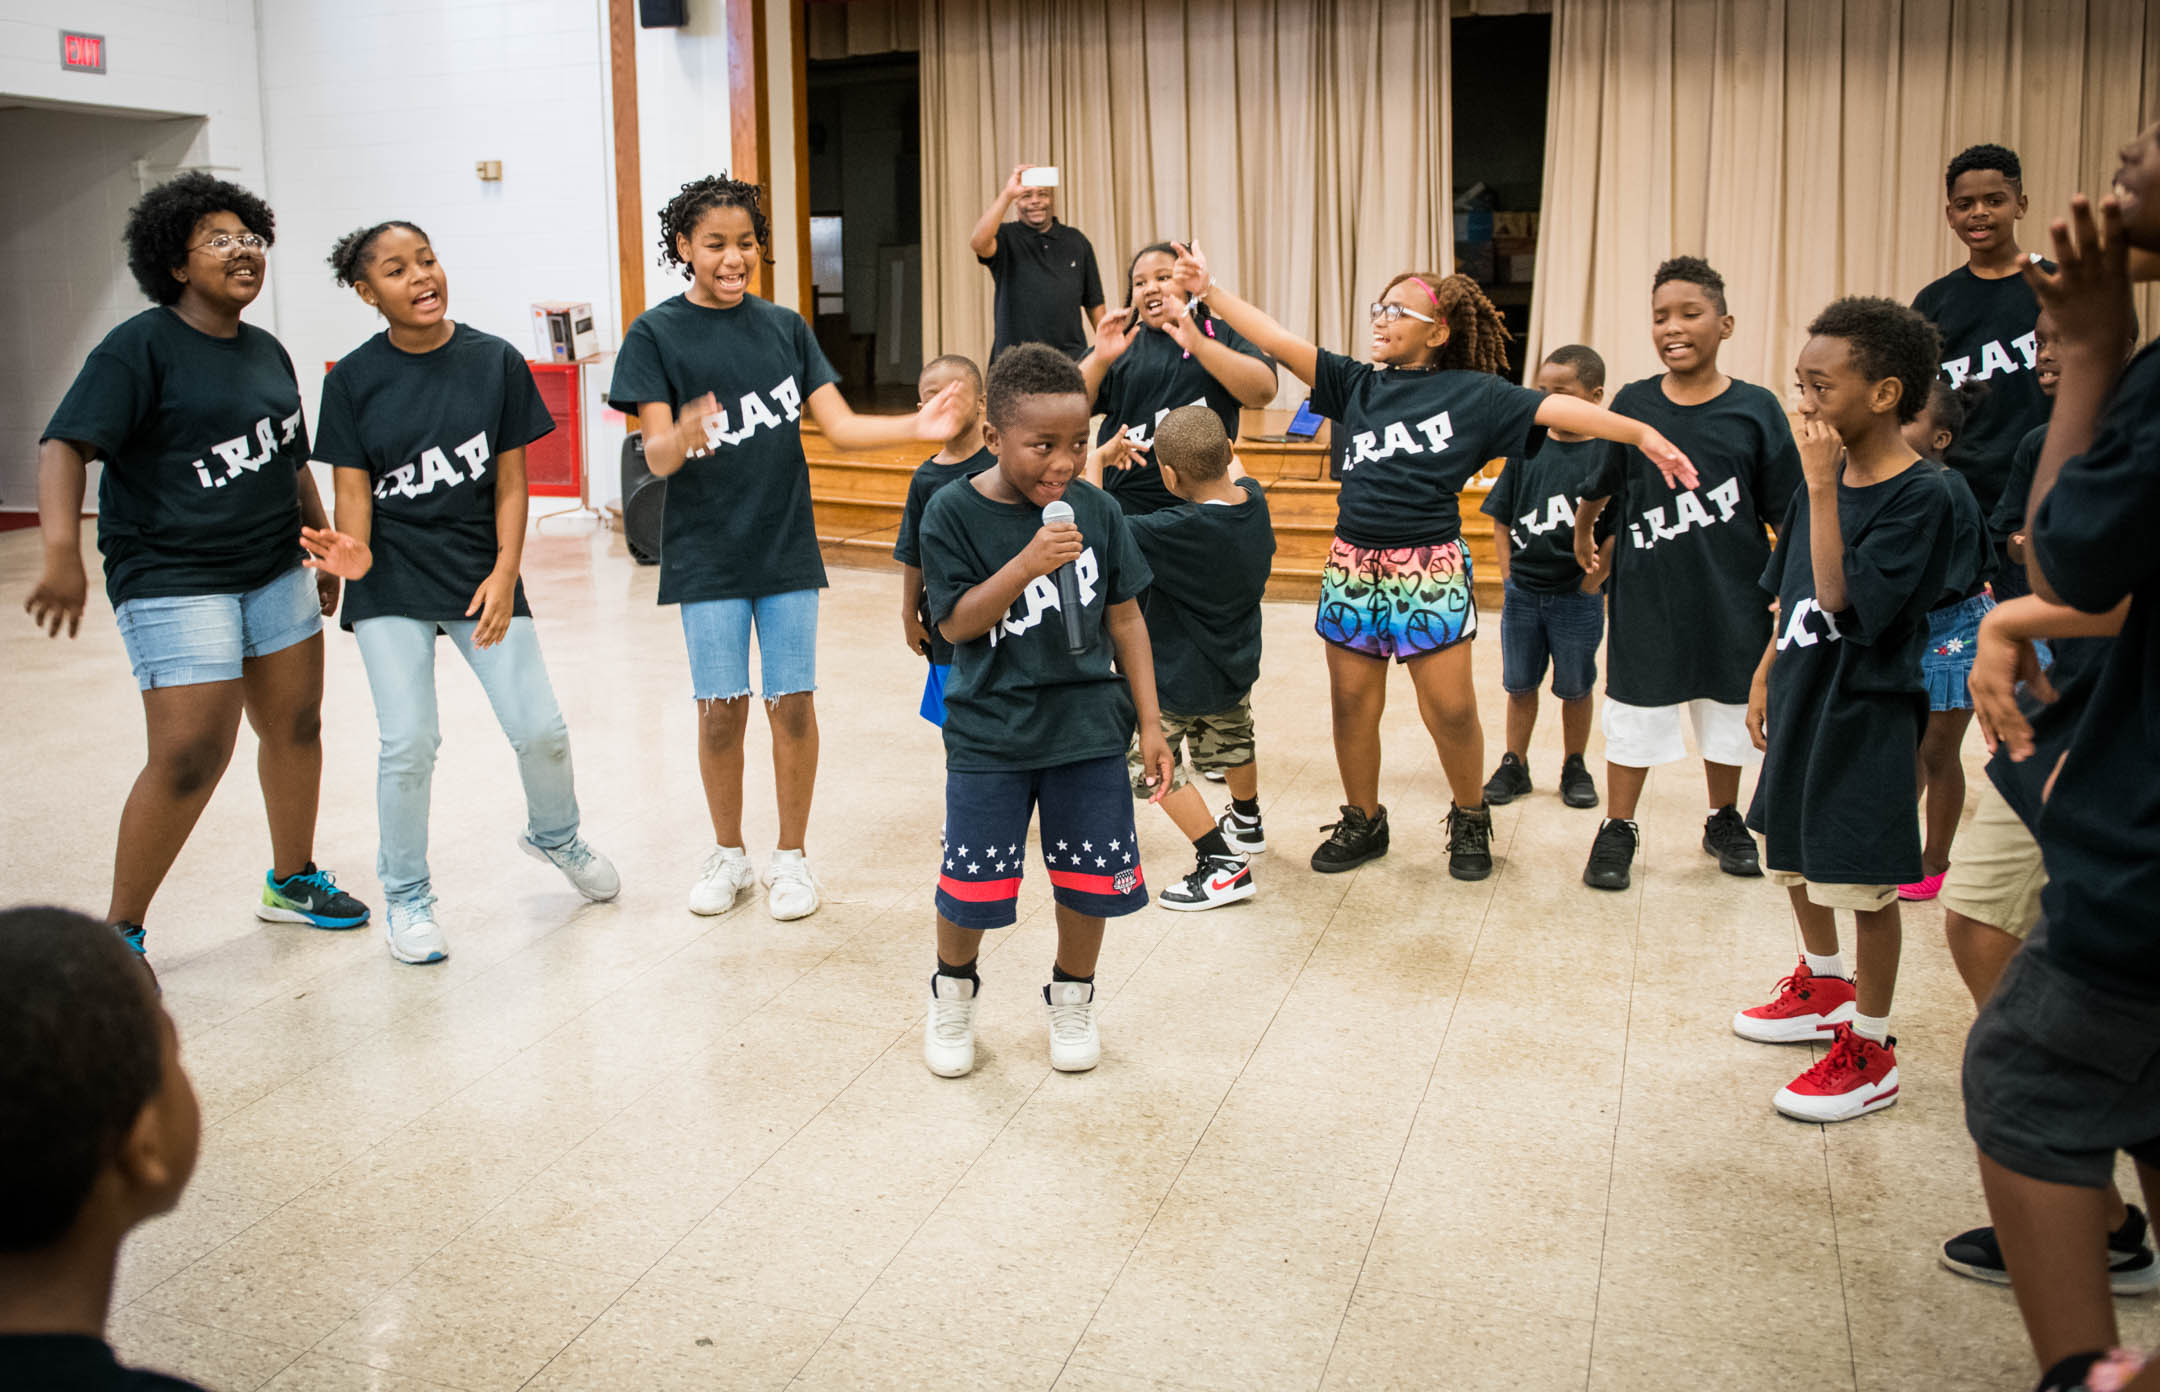 Students take part in a live performance at the closing of the iRap Summer Camp at Wheatley Elementary (Jefferson County). Photo by Bobby Ellis, July 27, 2018